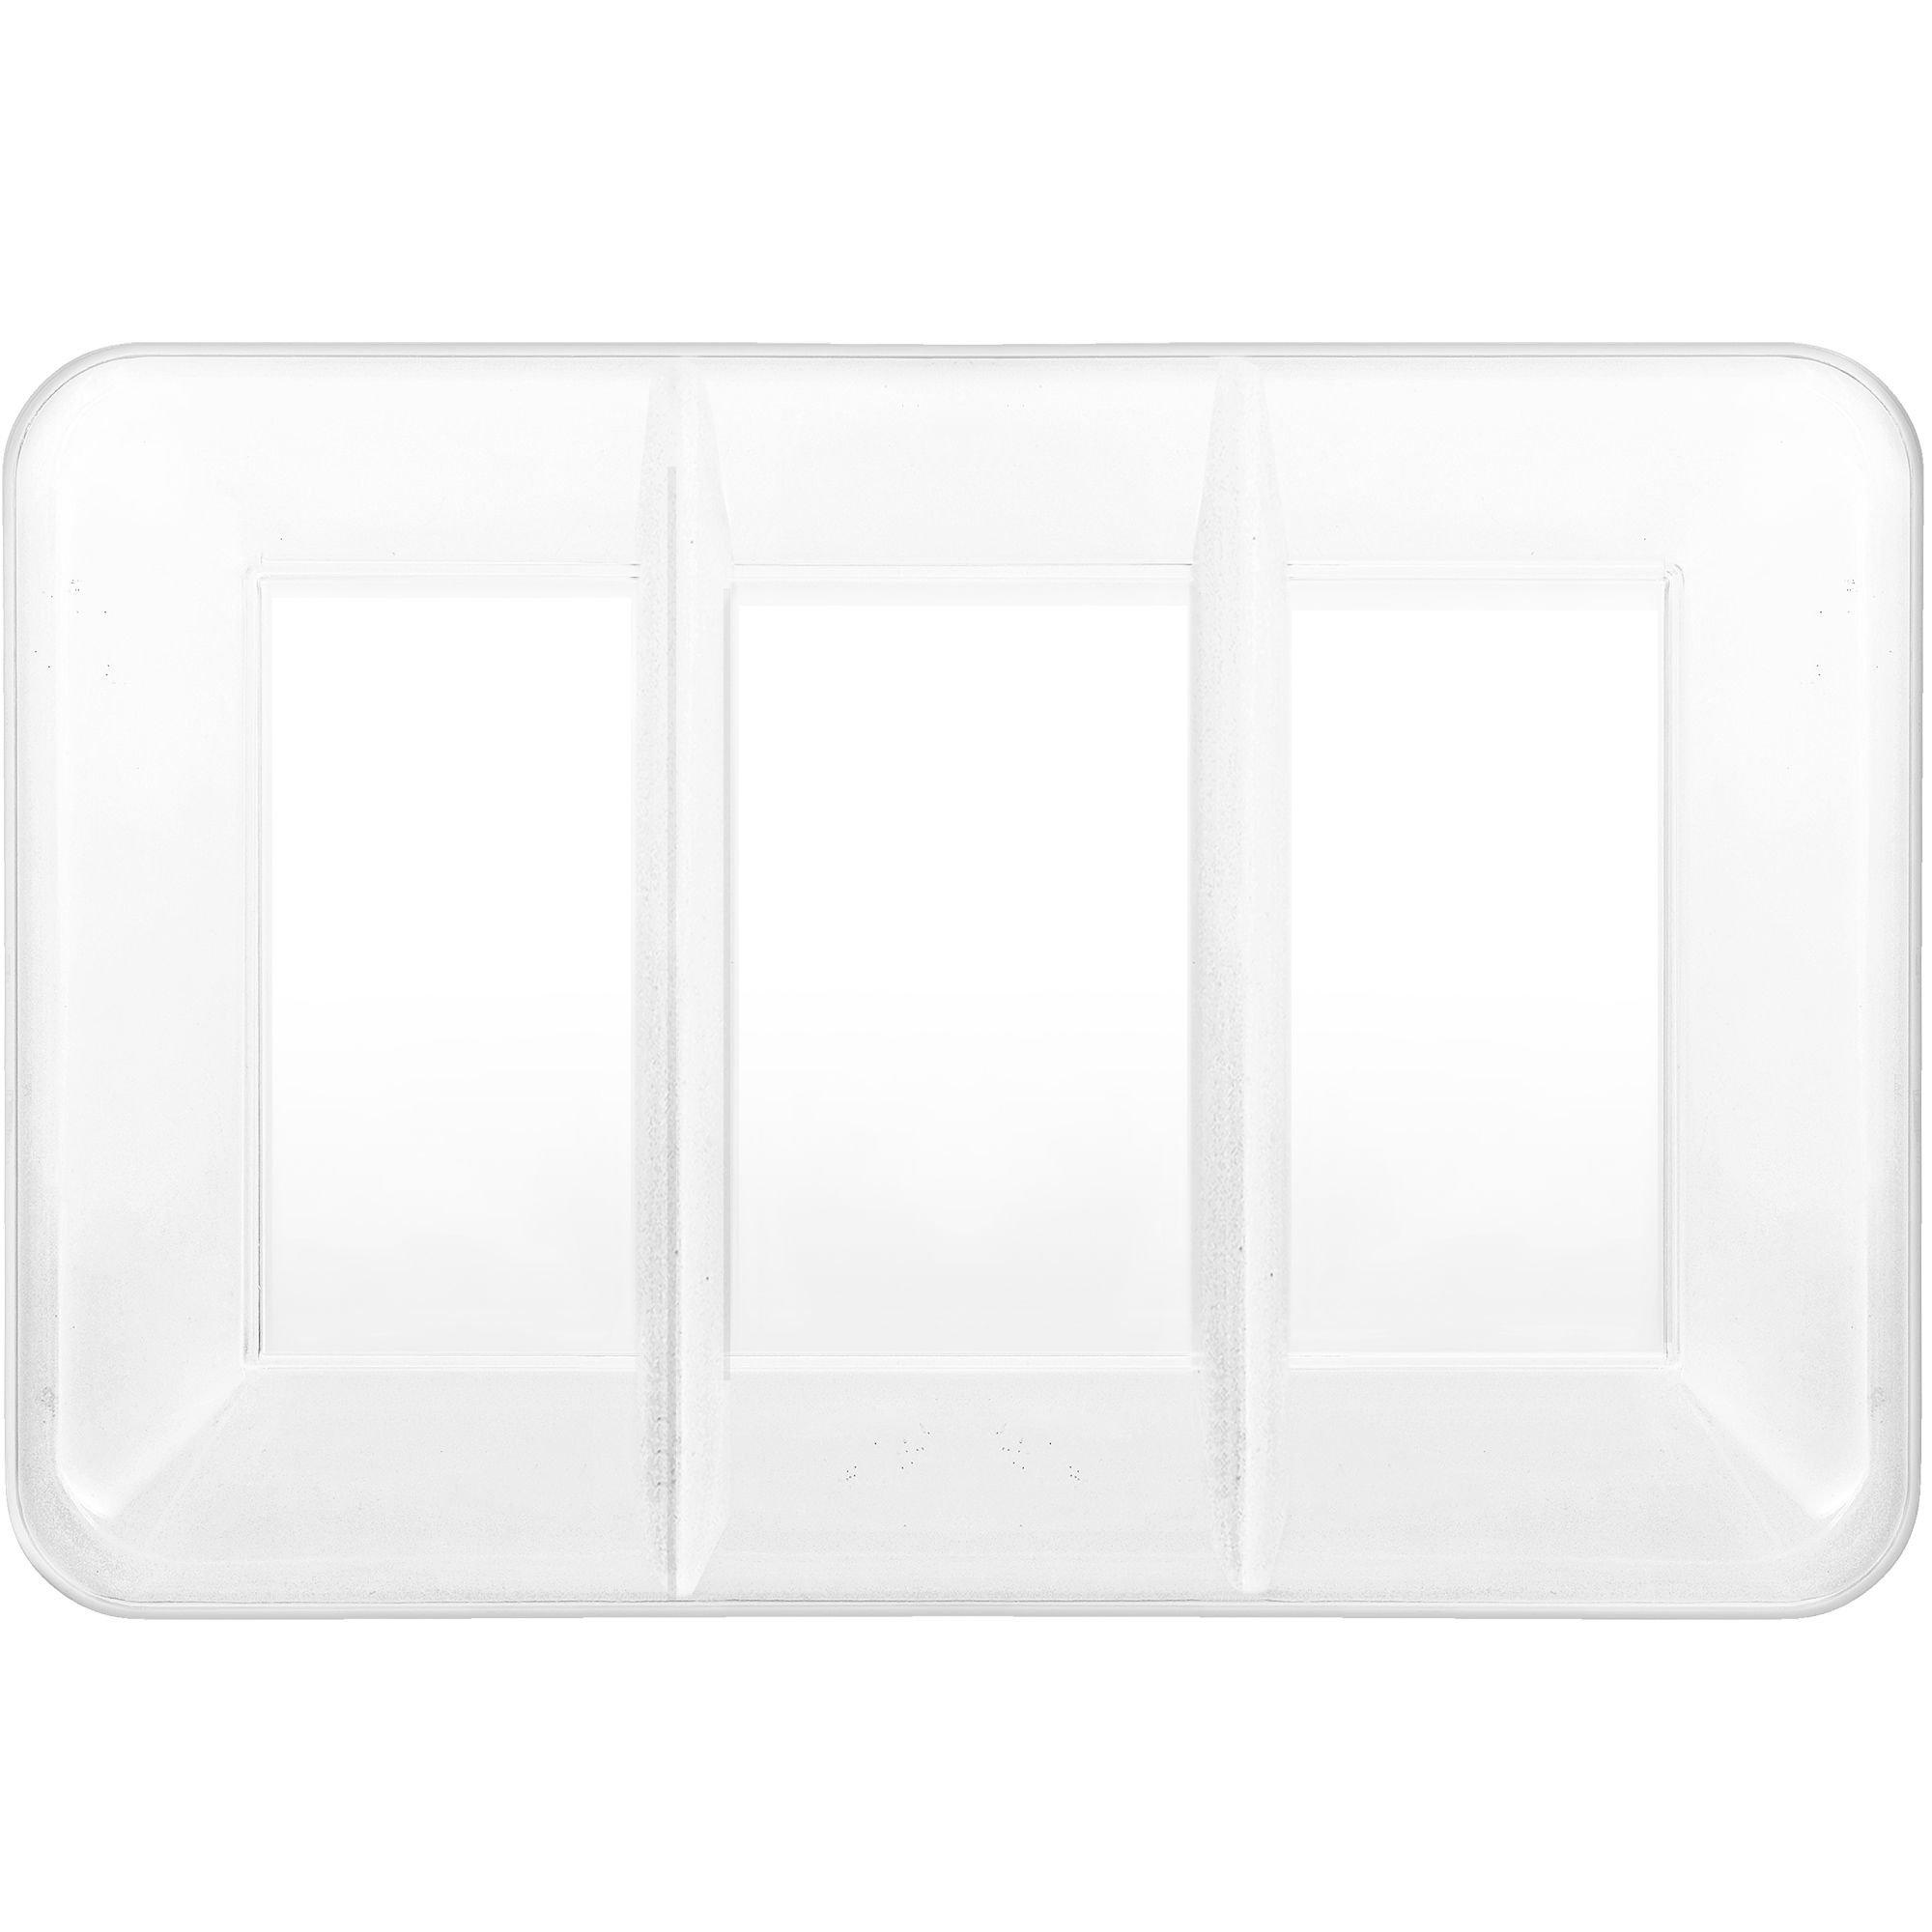 Large Plastic Tray, 3PCS PP Material Rectangle Food Tray Heat Resistance  Stackable Light Weight for Buffet Restaurant for Hotels(White)